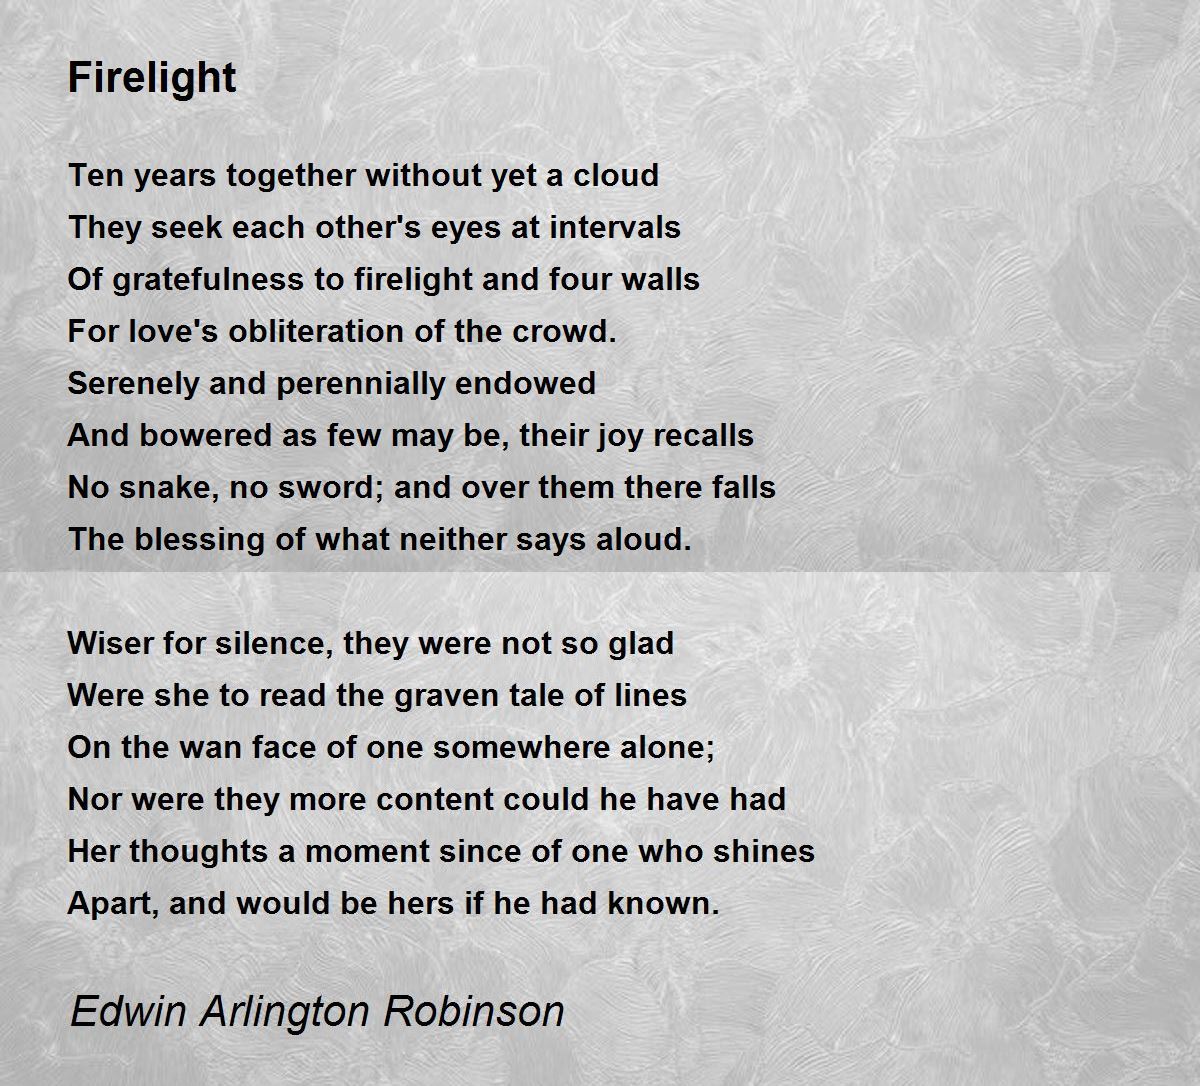 Firelight poem summary, analysis and comments. 